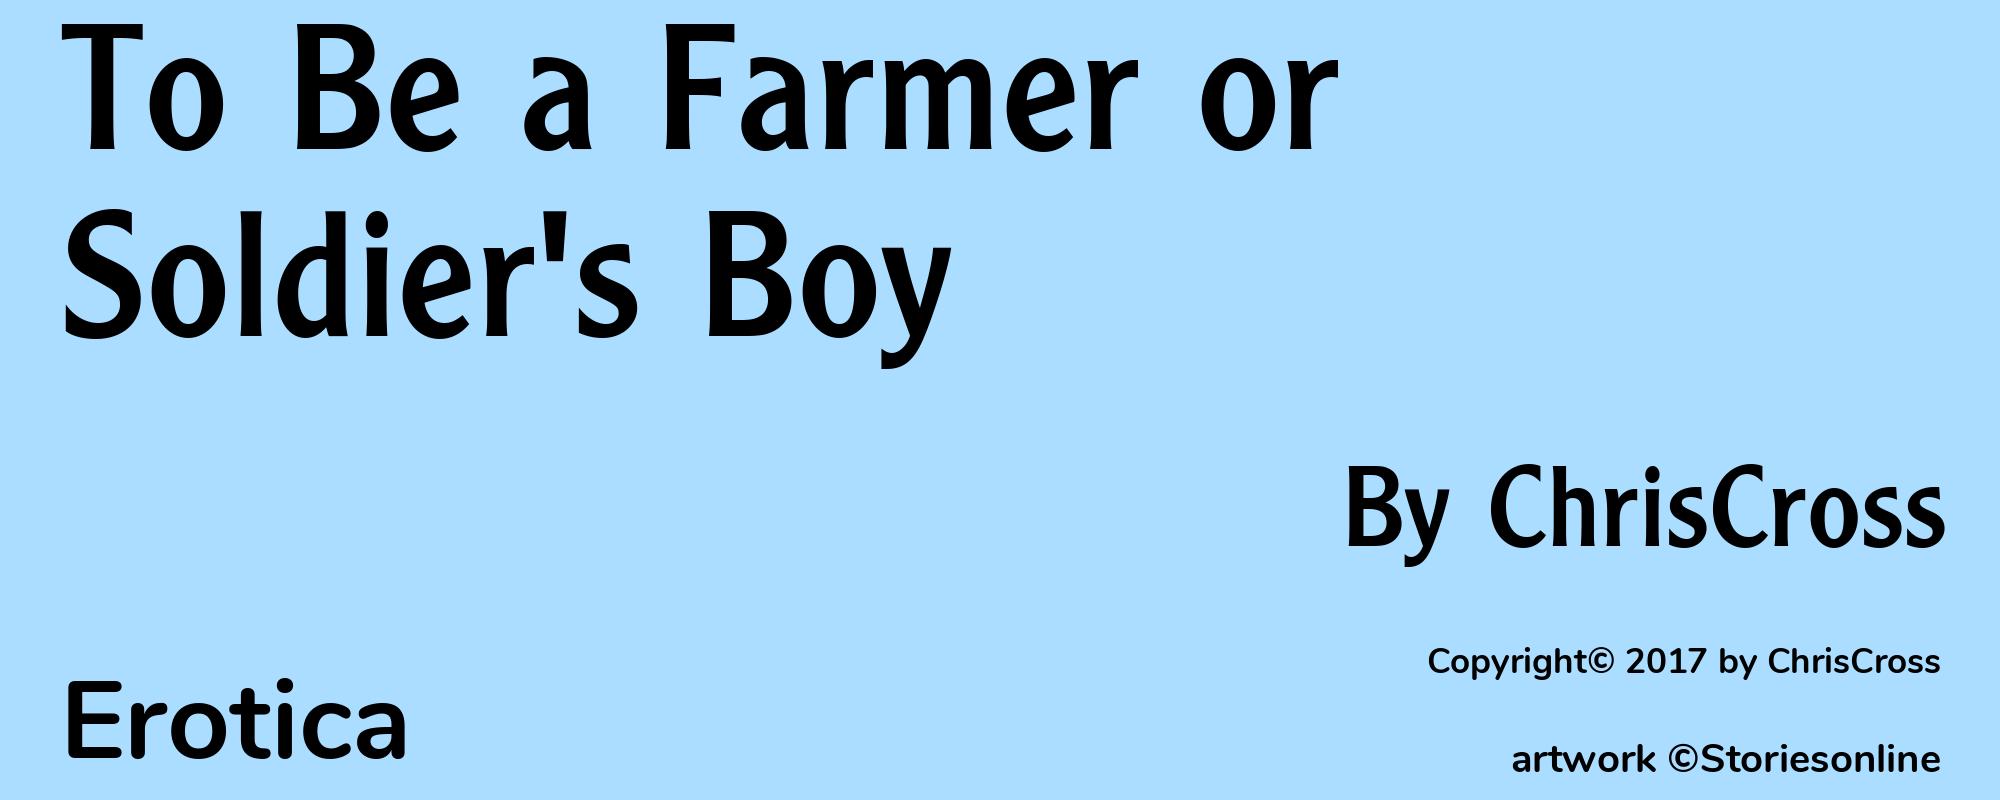 To Be a Farmer or Soldier's Boy - Cover